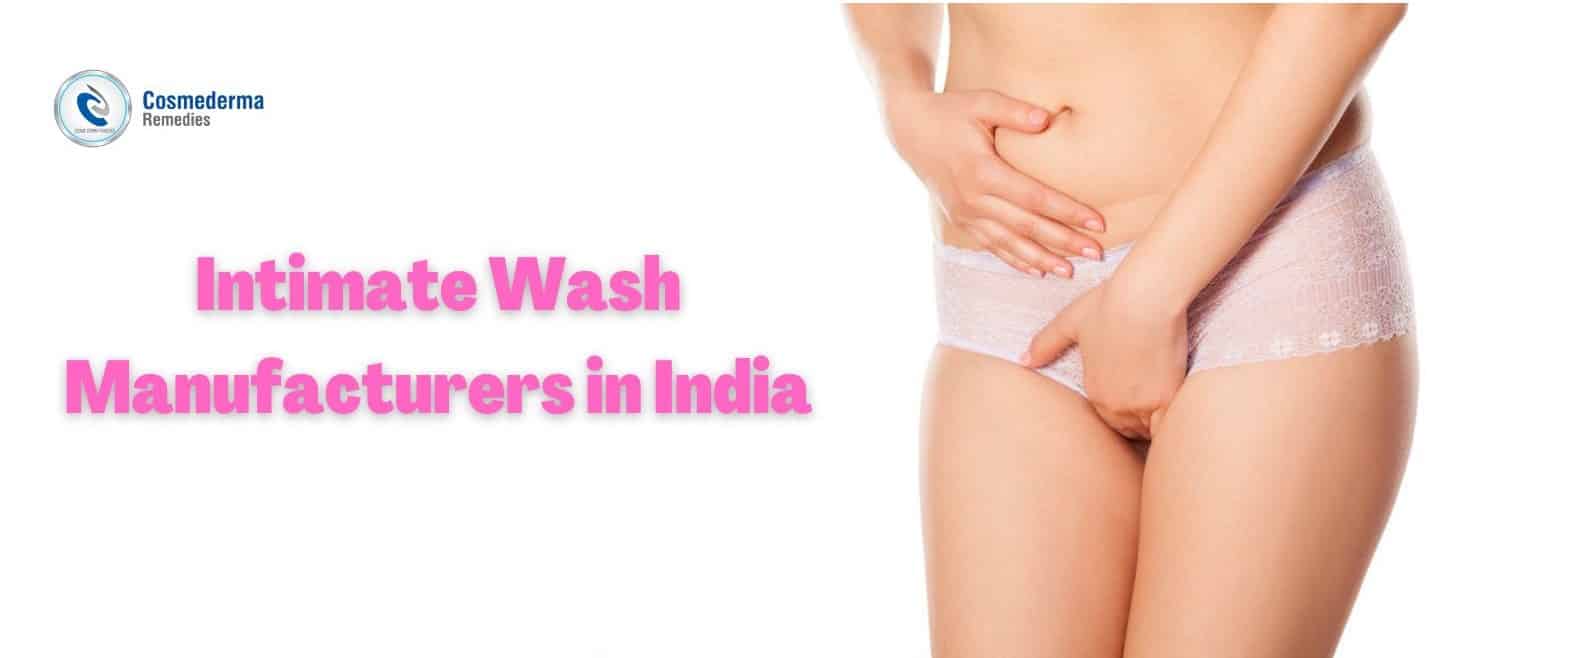 Intimate Wash Manufacturers in India